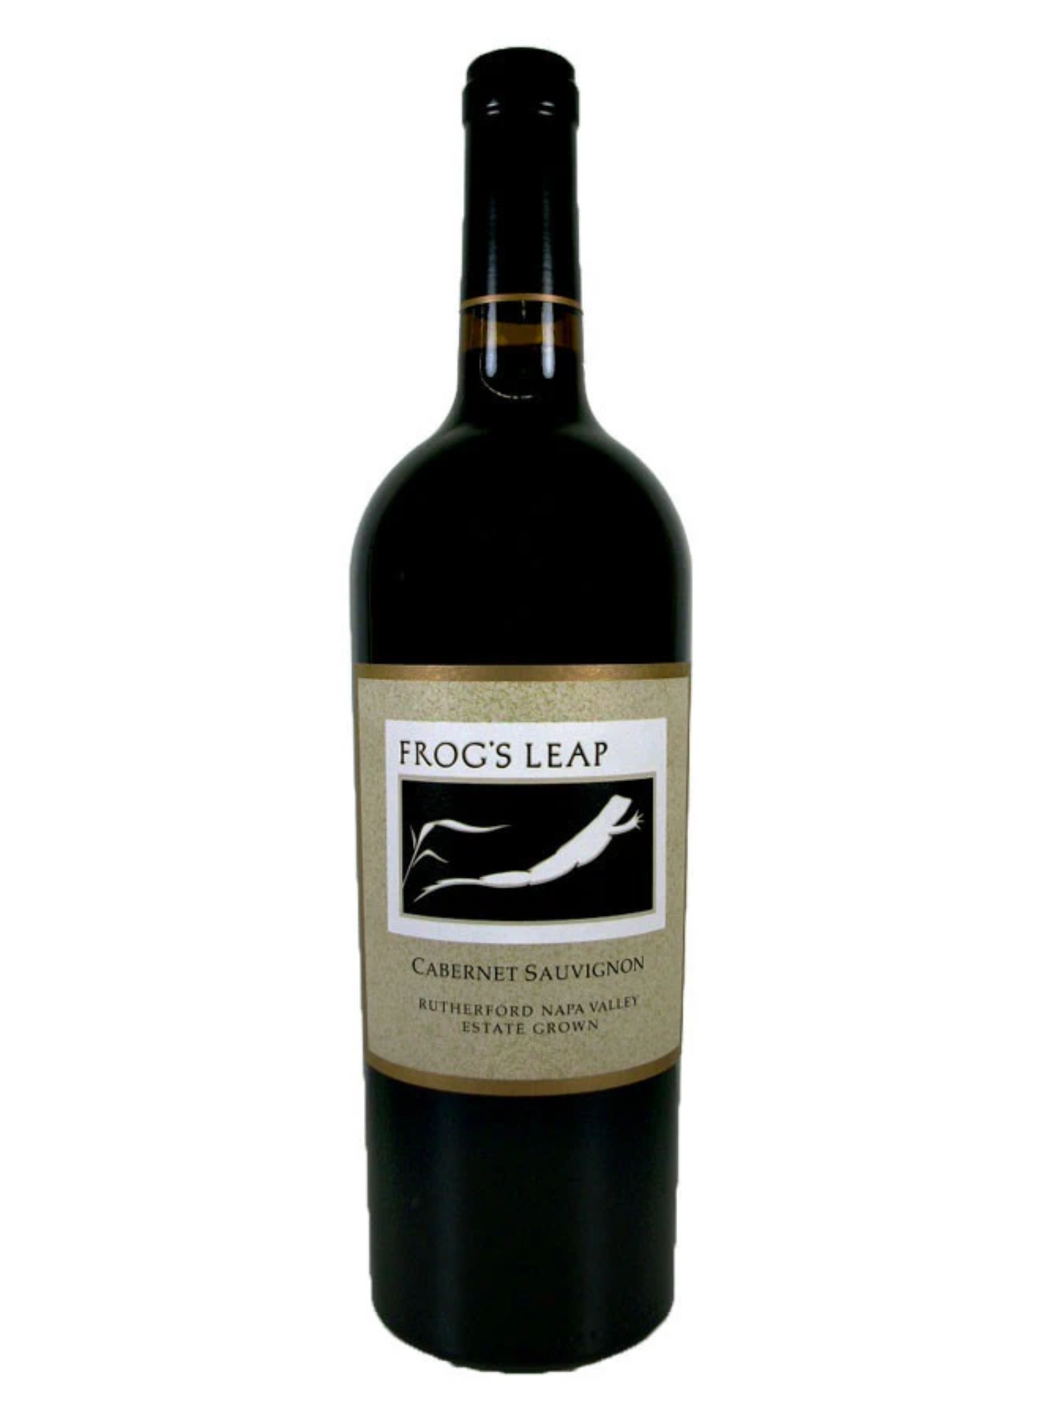 Frog’s Leap Rutherford 2016 Cabernet Sauvignon